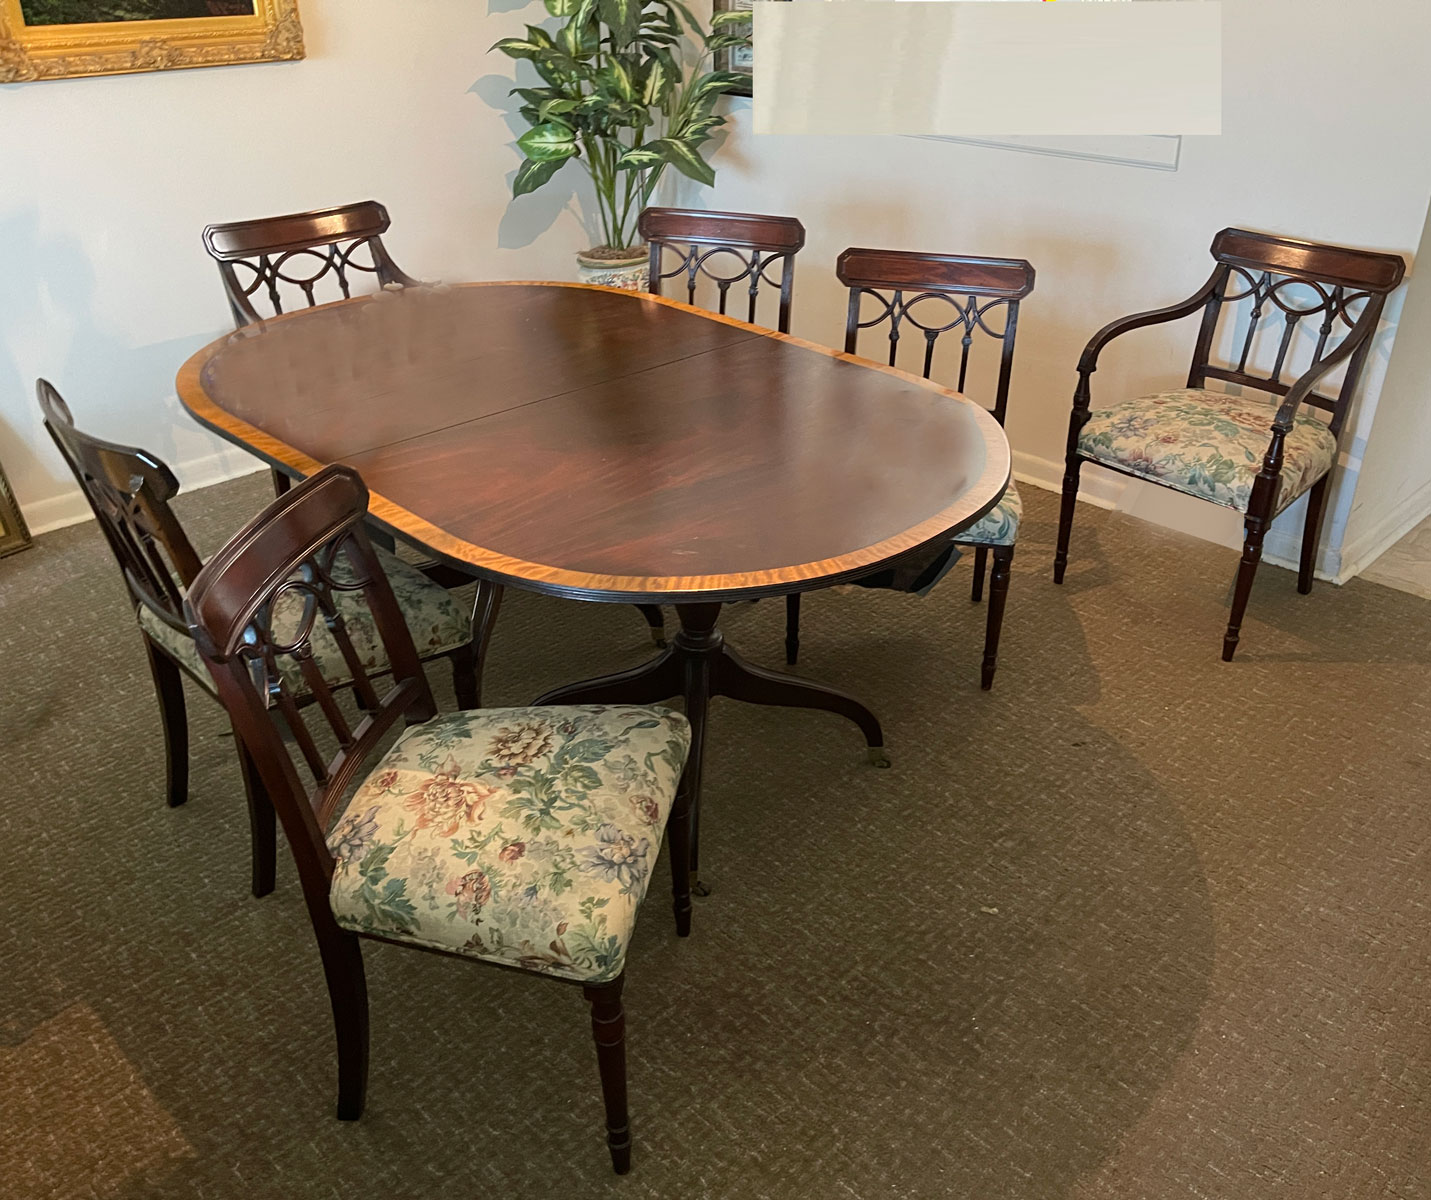 7 PC DINING TABLE CHAIRS Banded 36c50a